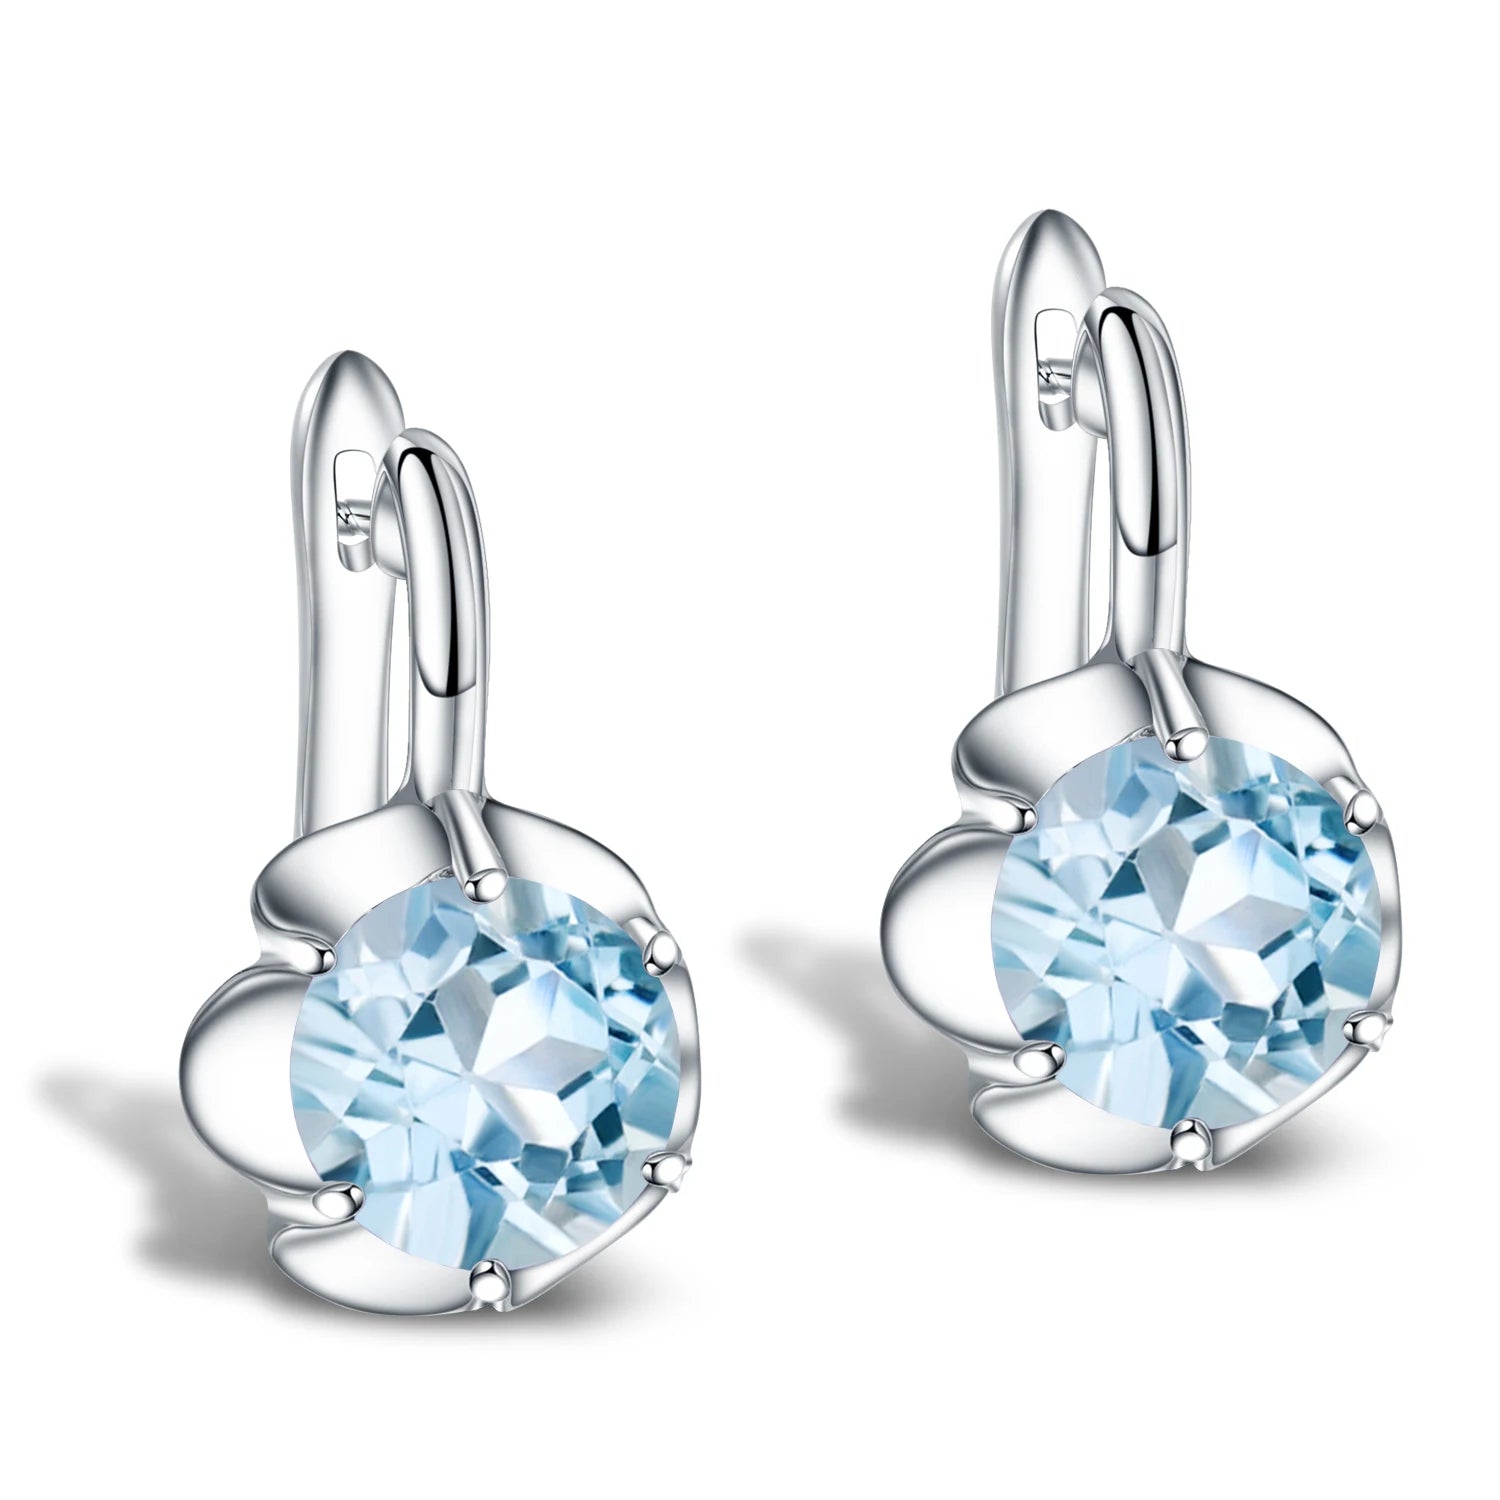 GEM'S BALLET Pure 925 Sterling Silver Fine Jewelry Oval 5.47Ct Natural Green Amethyst Birthstone Stud Earrings For Women Sky Blue Topaz 925 Sterling Silver CHINA